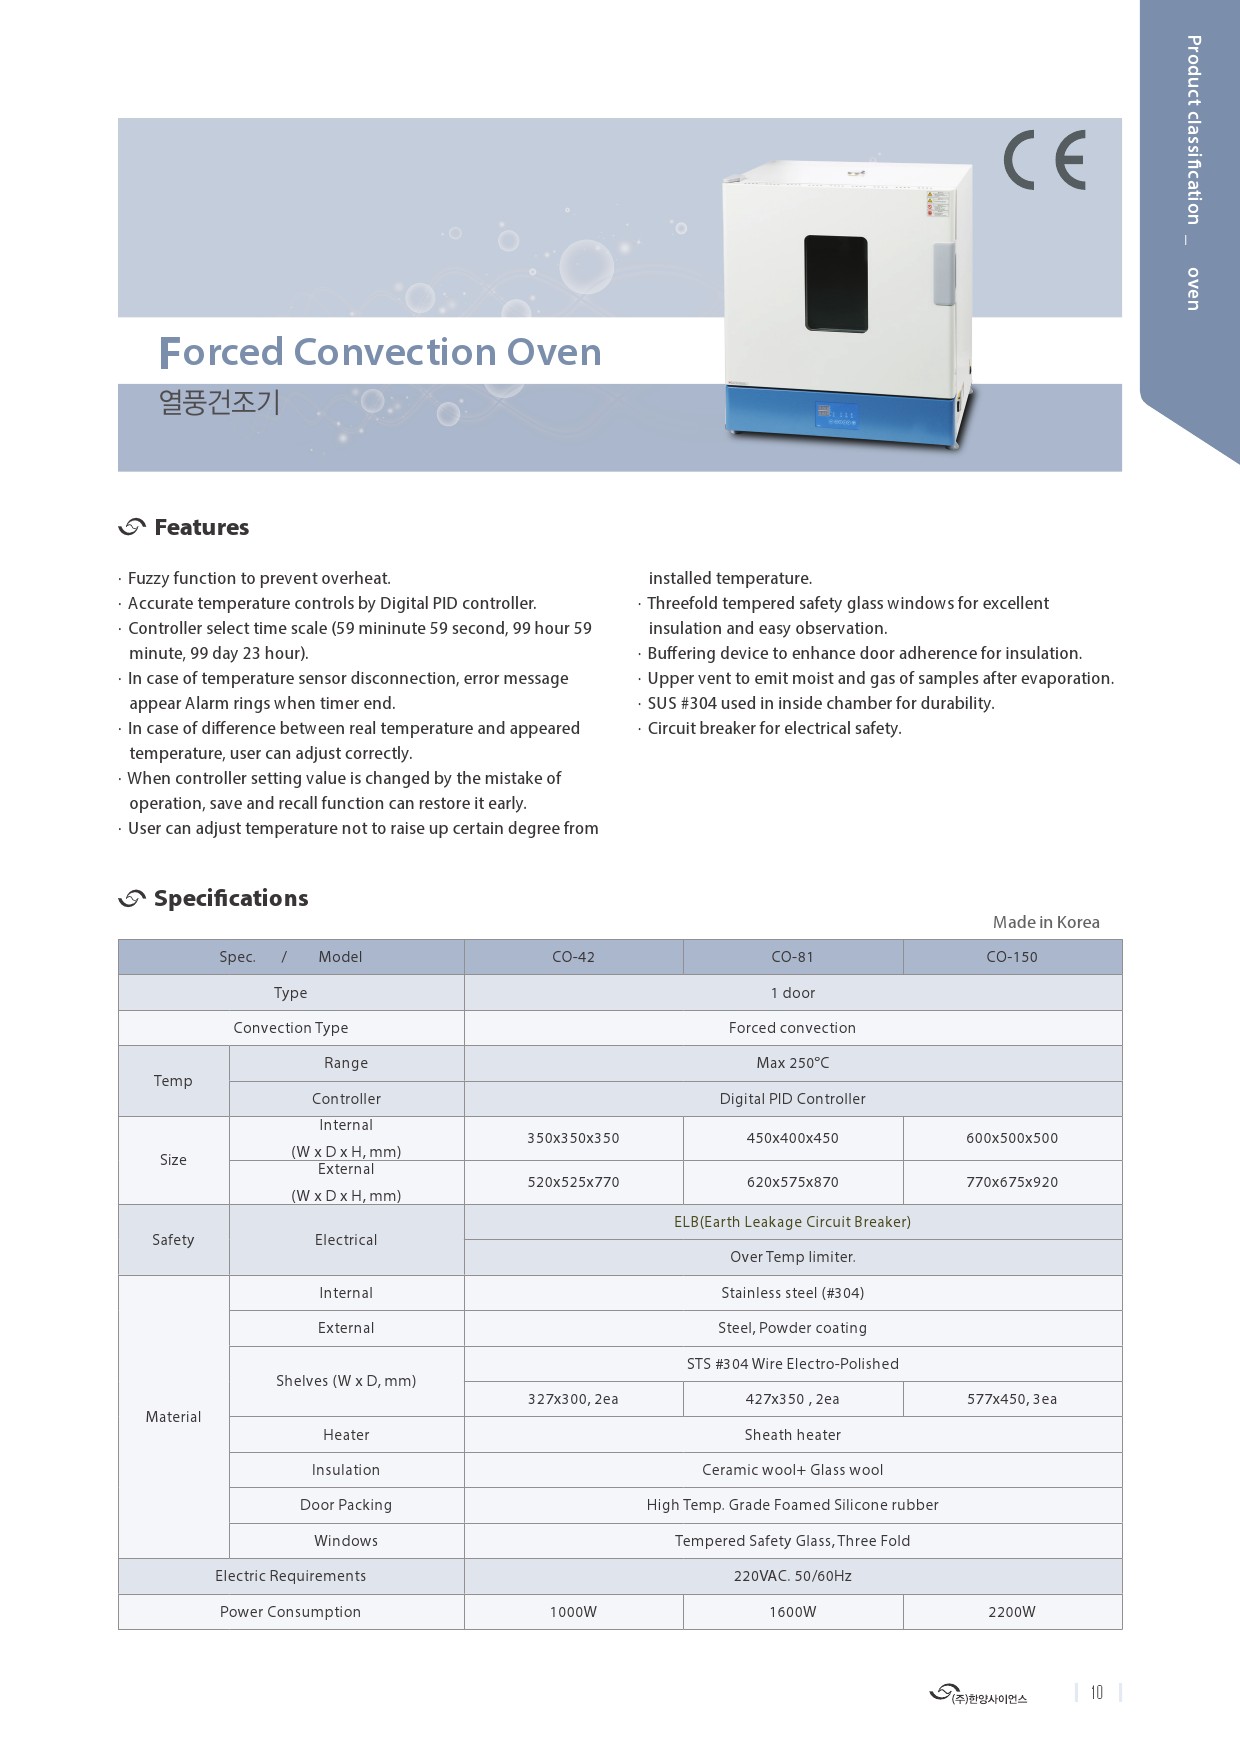 HYSC_Introduction_Forced Convection Oven-1.jpg